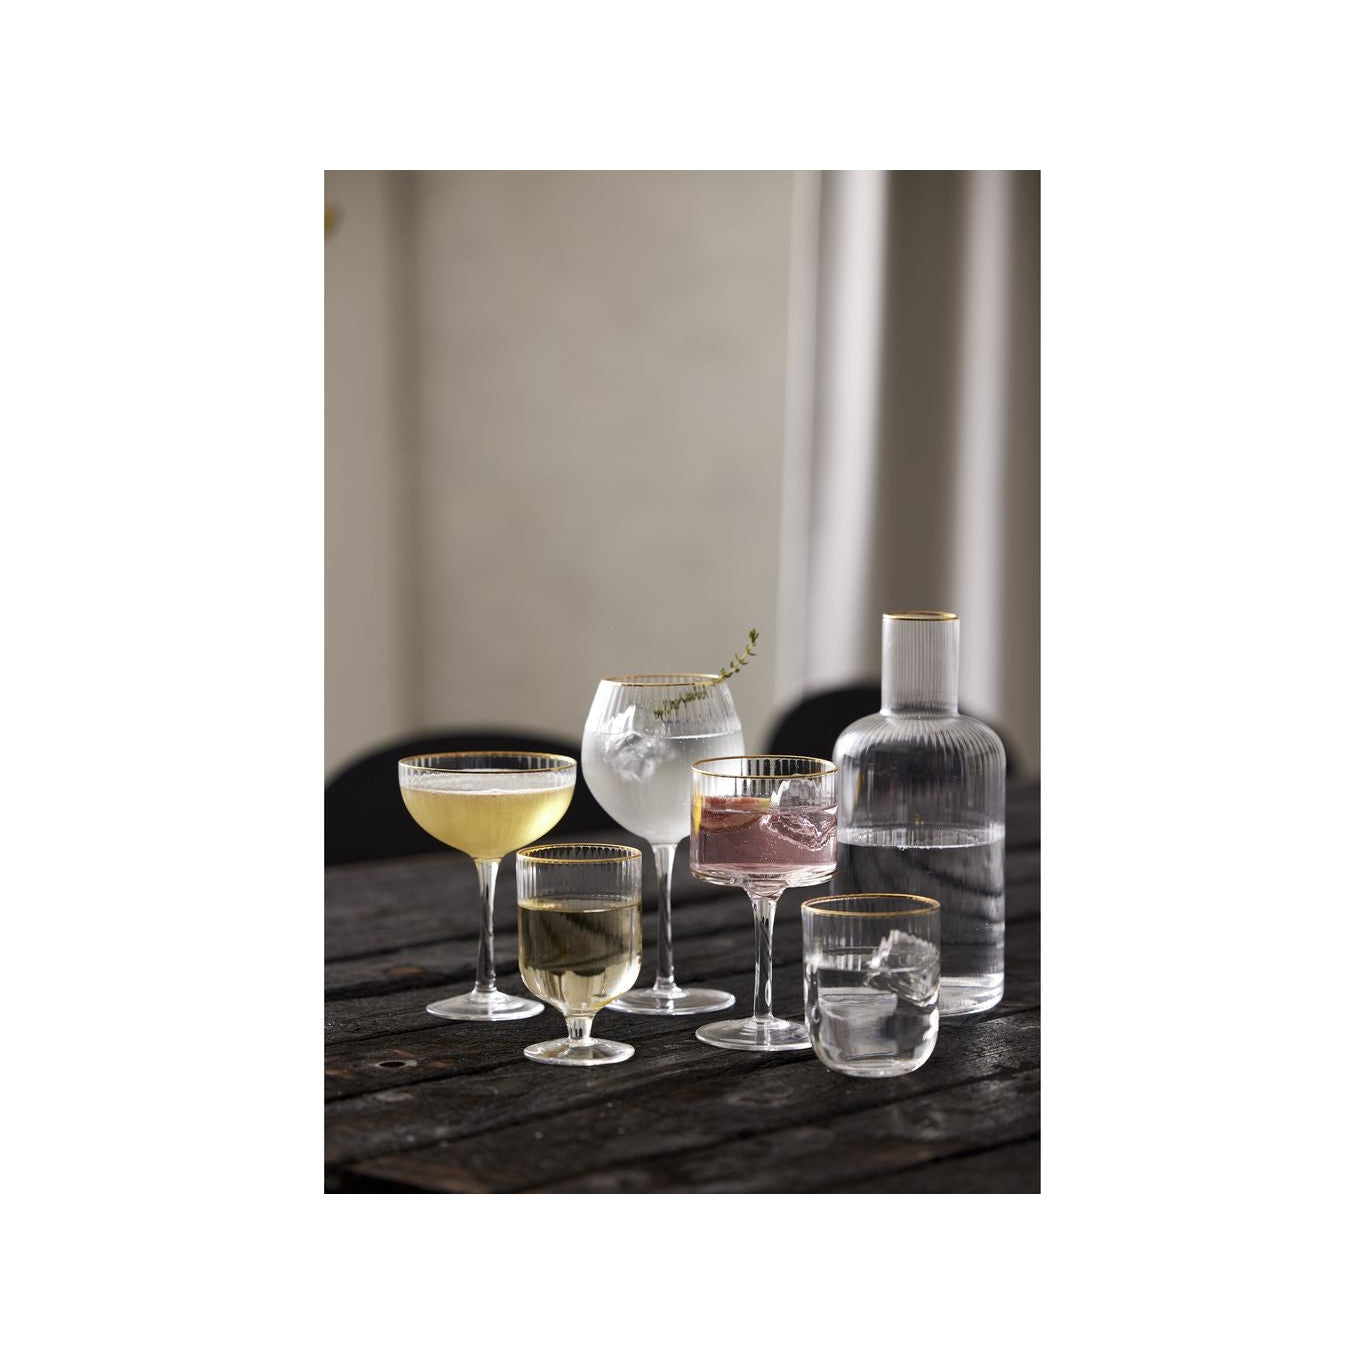 Lyngby Glas Palermo Gold Wine Glass 30 Cl, 4 pc's.